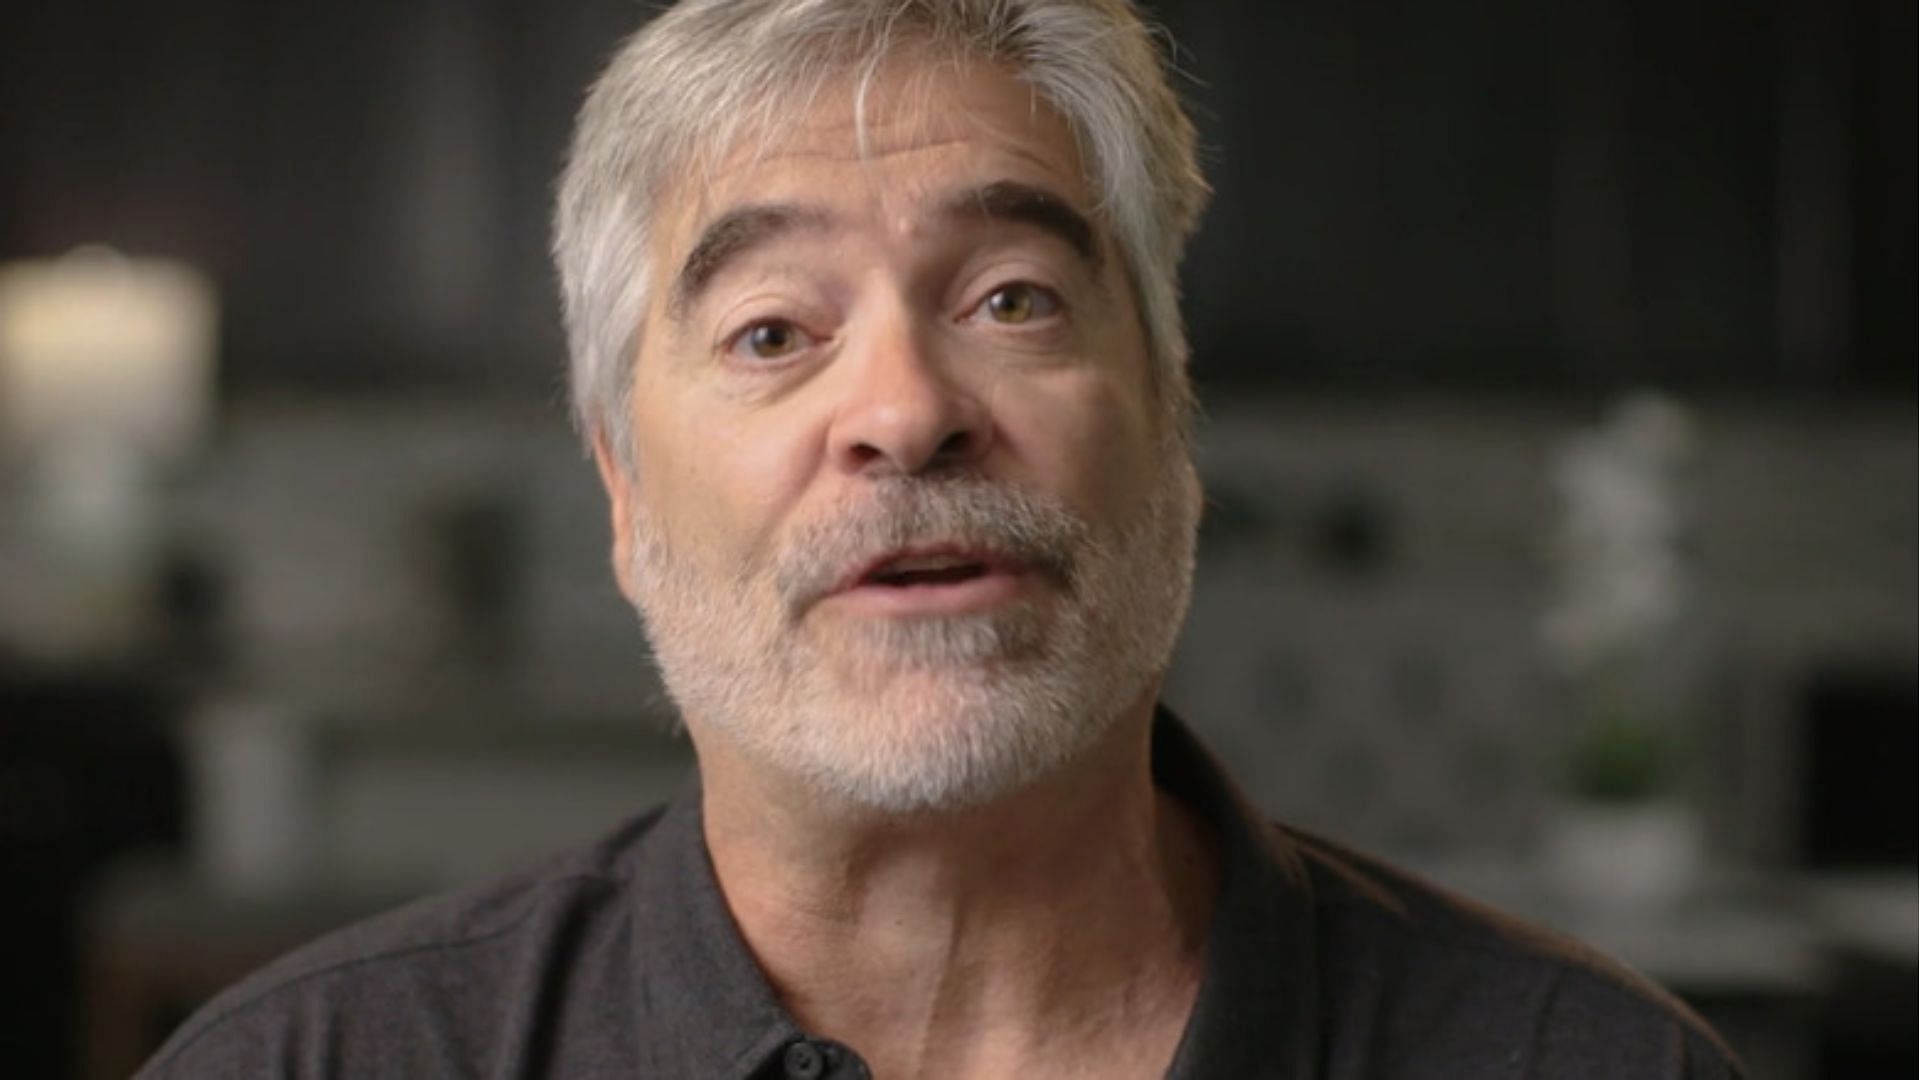 Vince Russo recently spoke about IMPACT